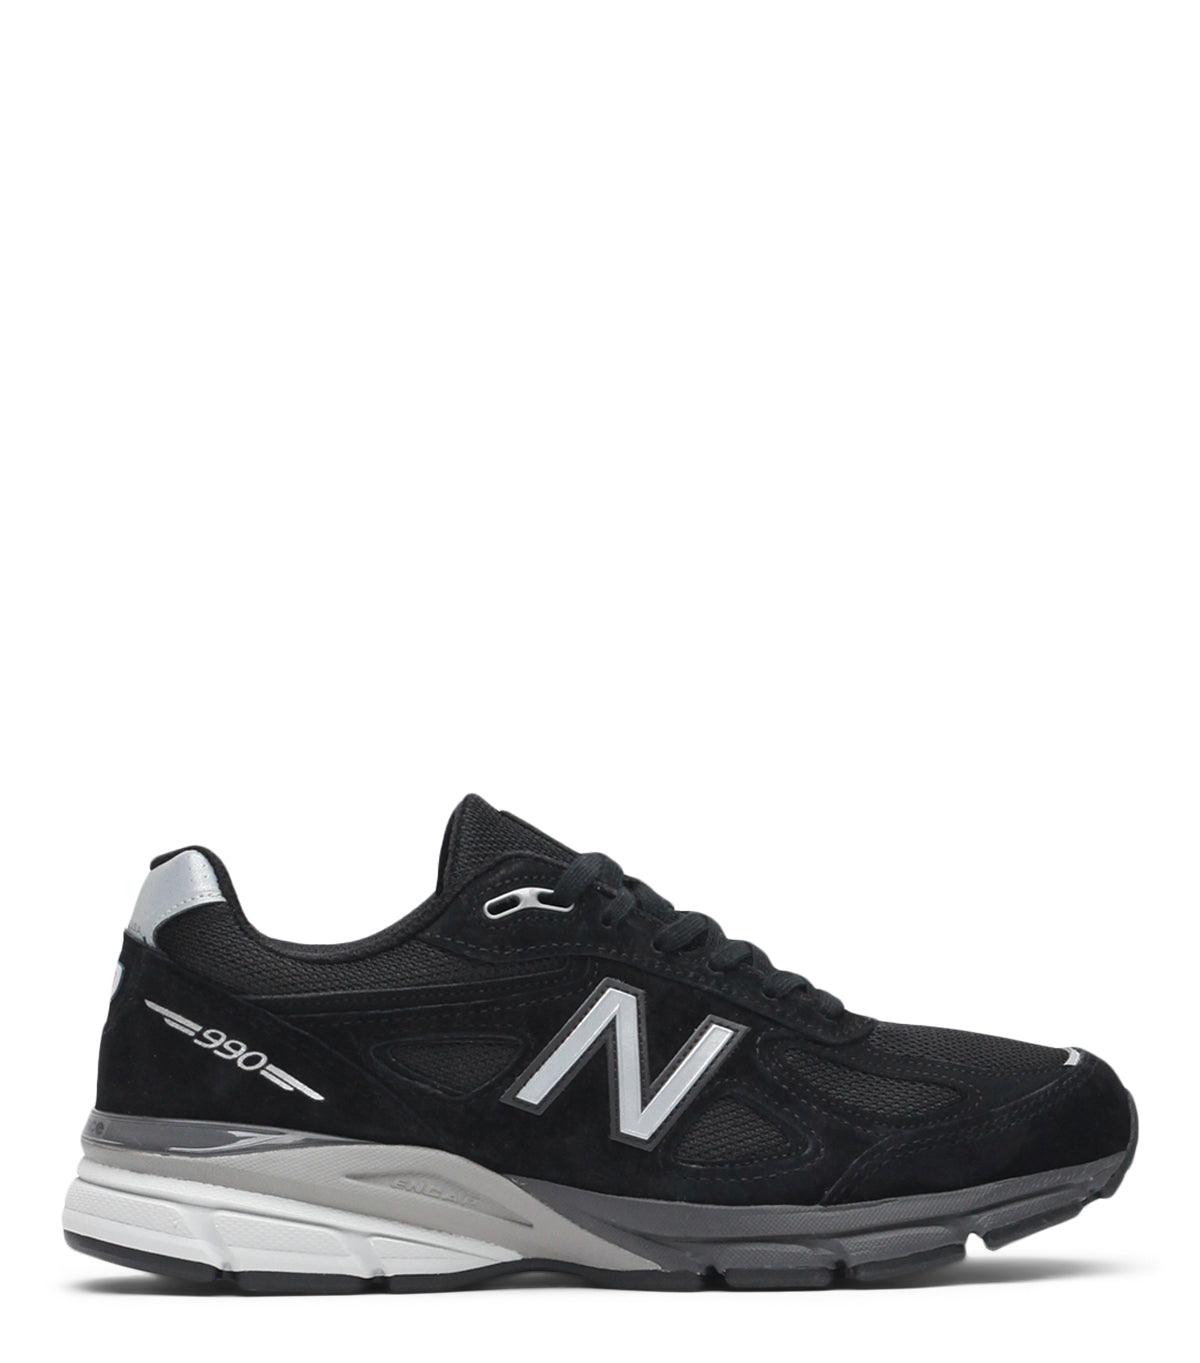 New Balance Made In USA 990v4 Core Black